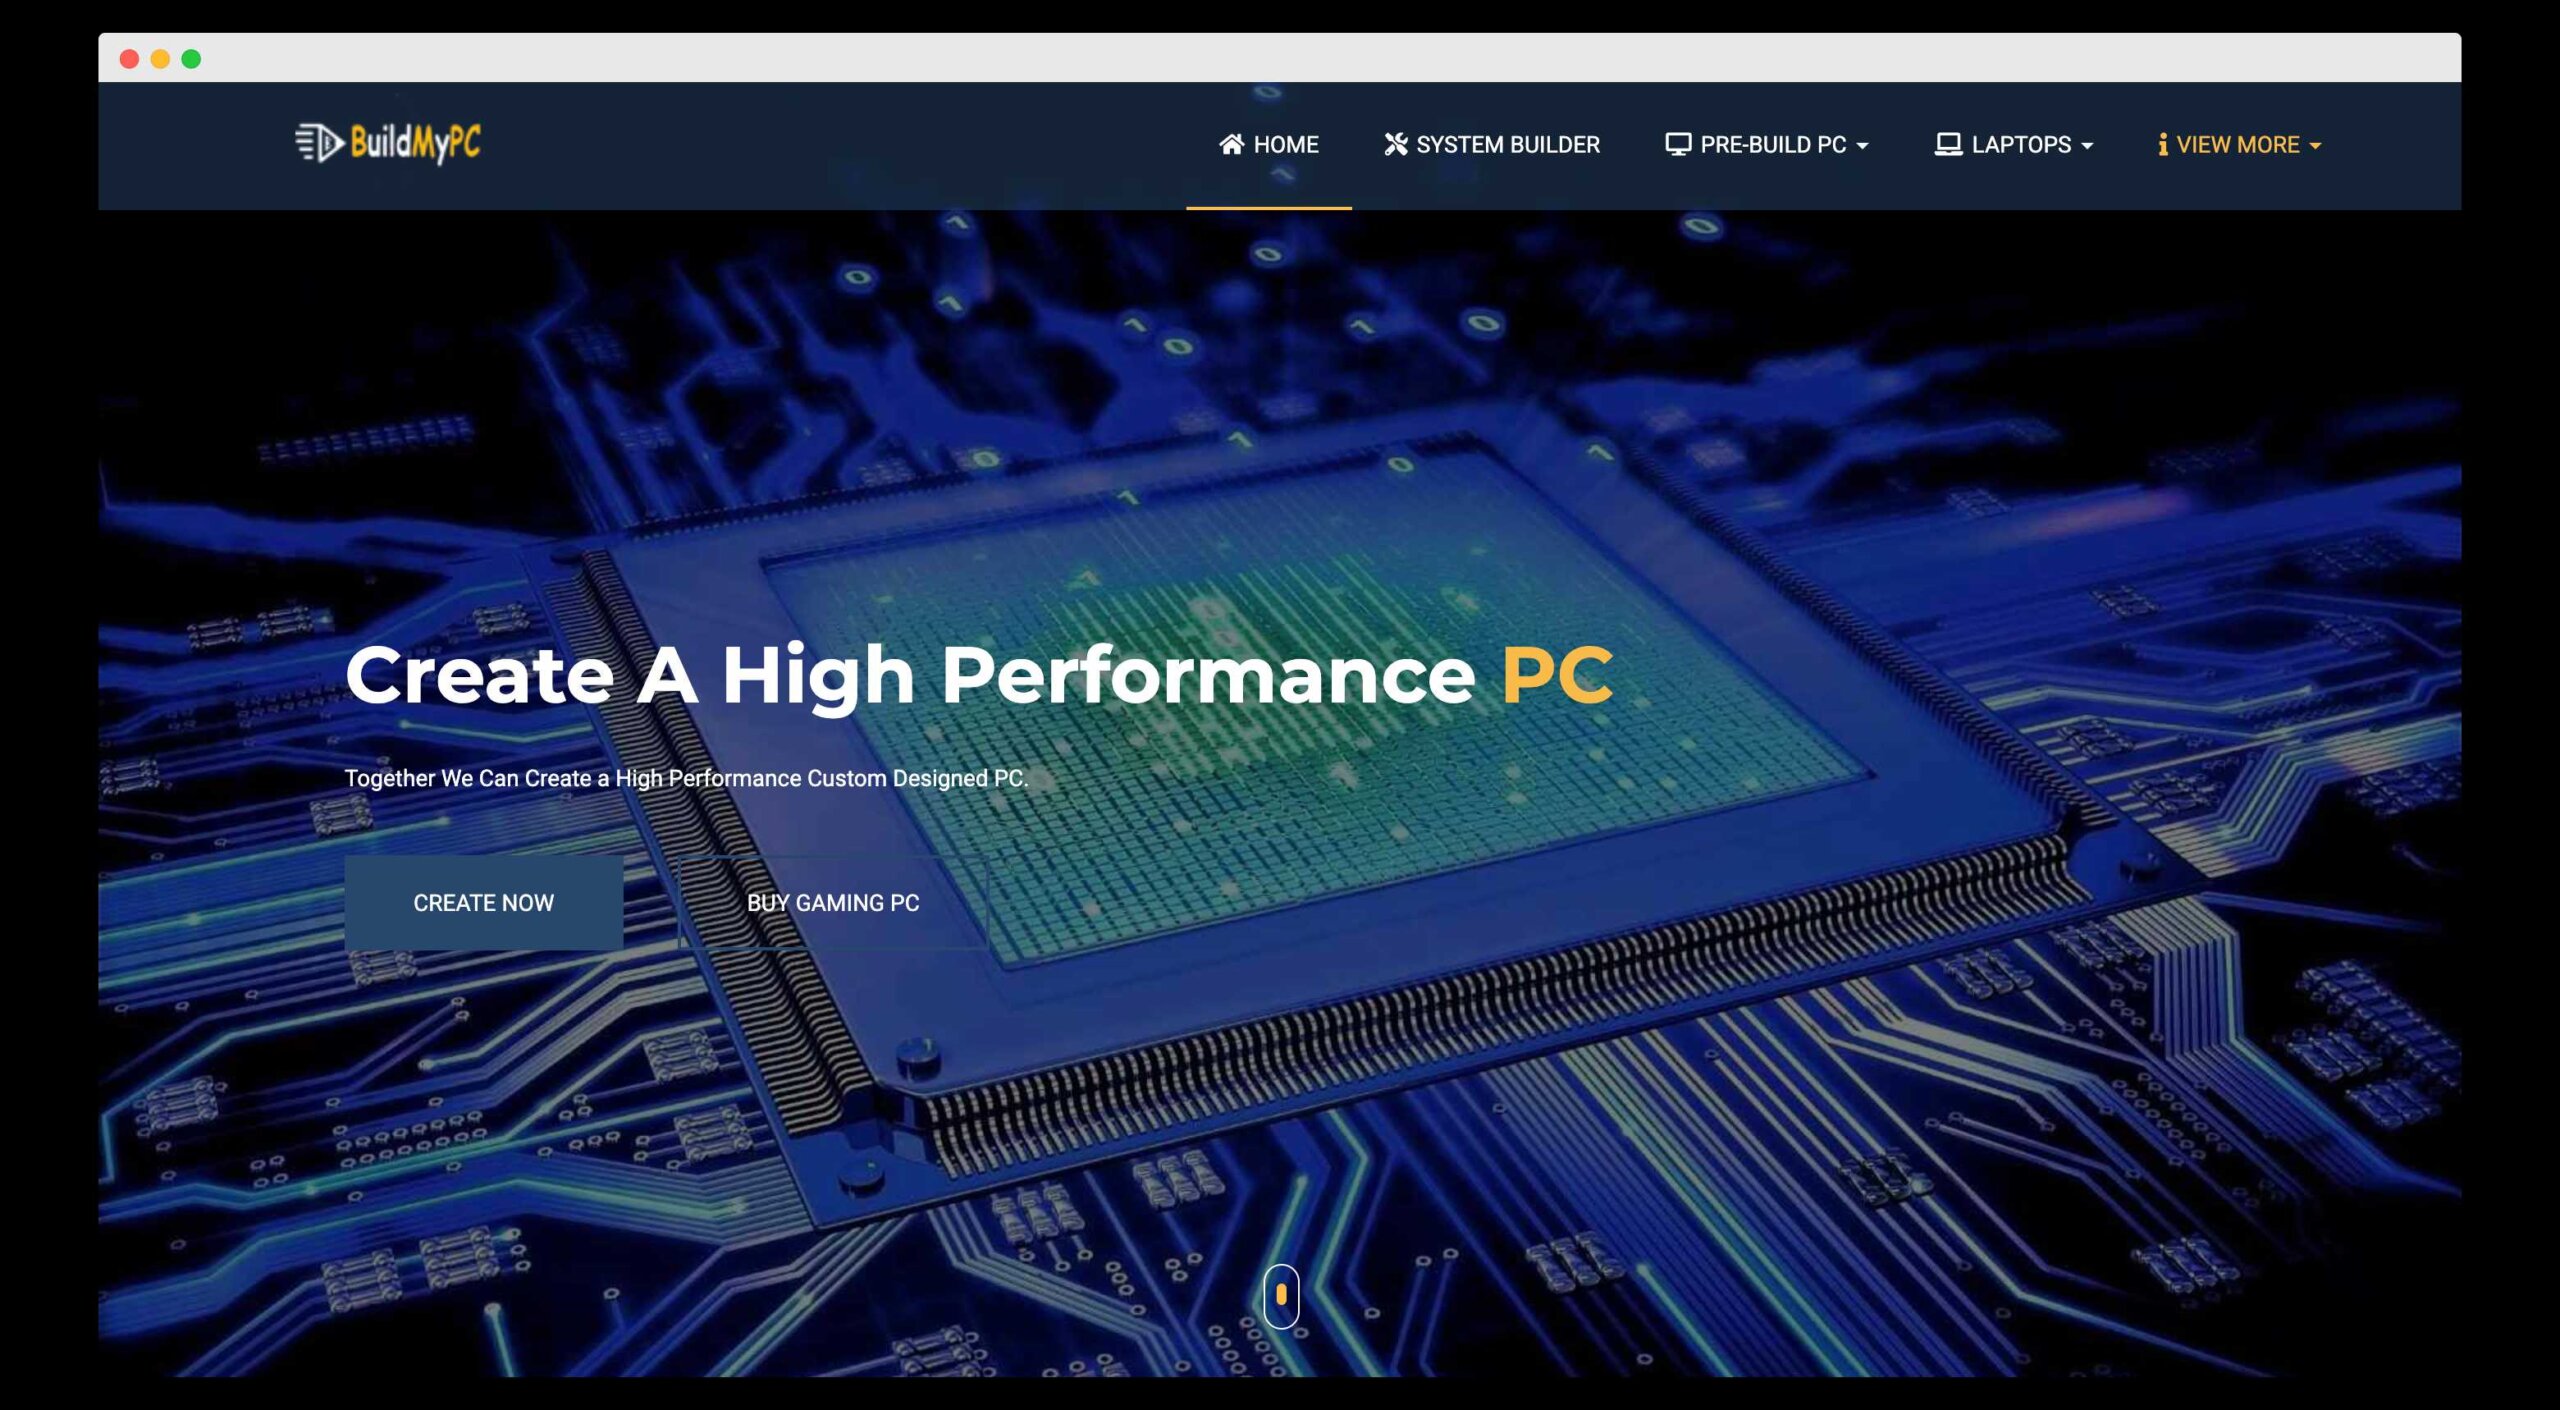 build my pc, a website for checking pc parts compatibility